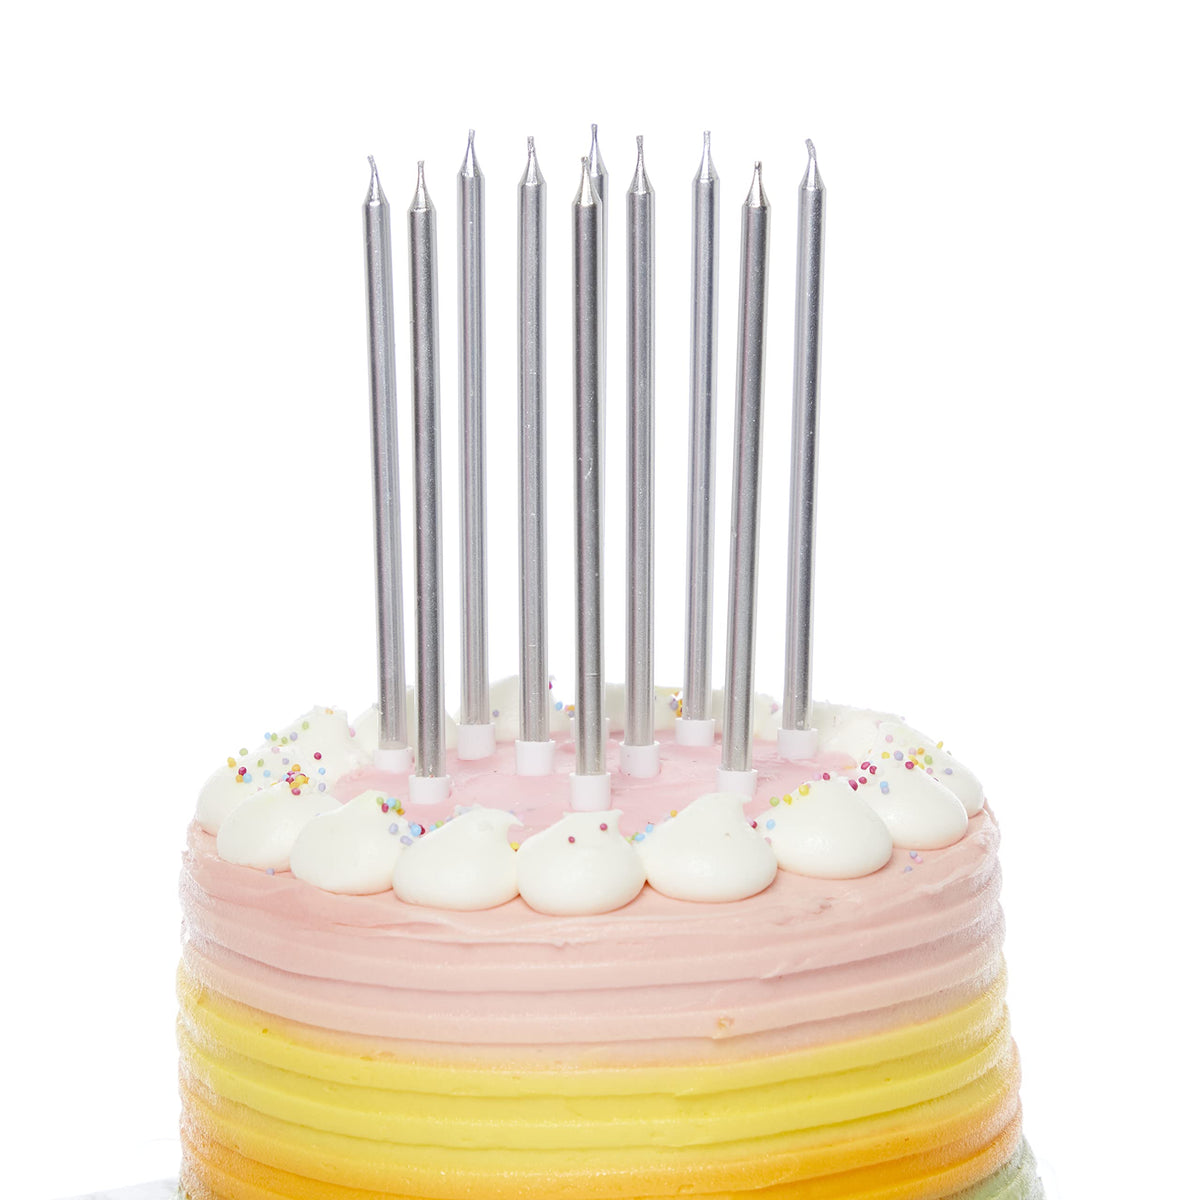 Amscan 9911569 - Silver Tall Skinny Cake Candles - 10 Pack